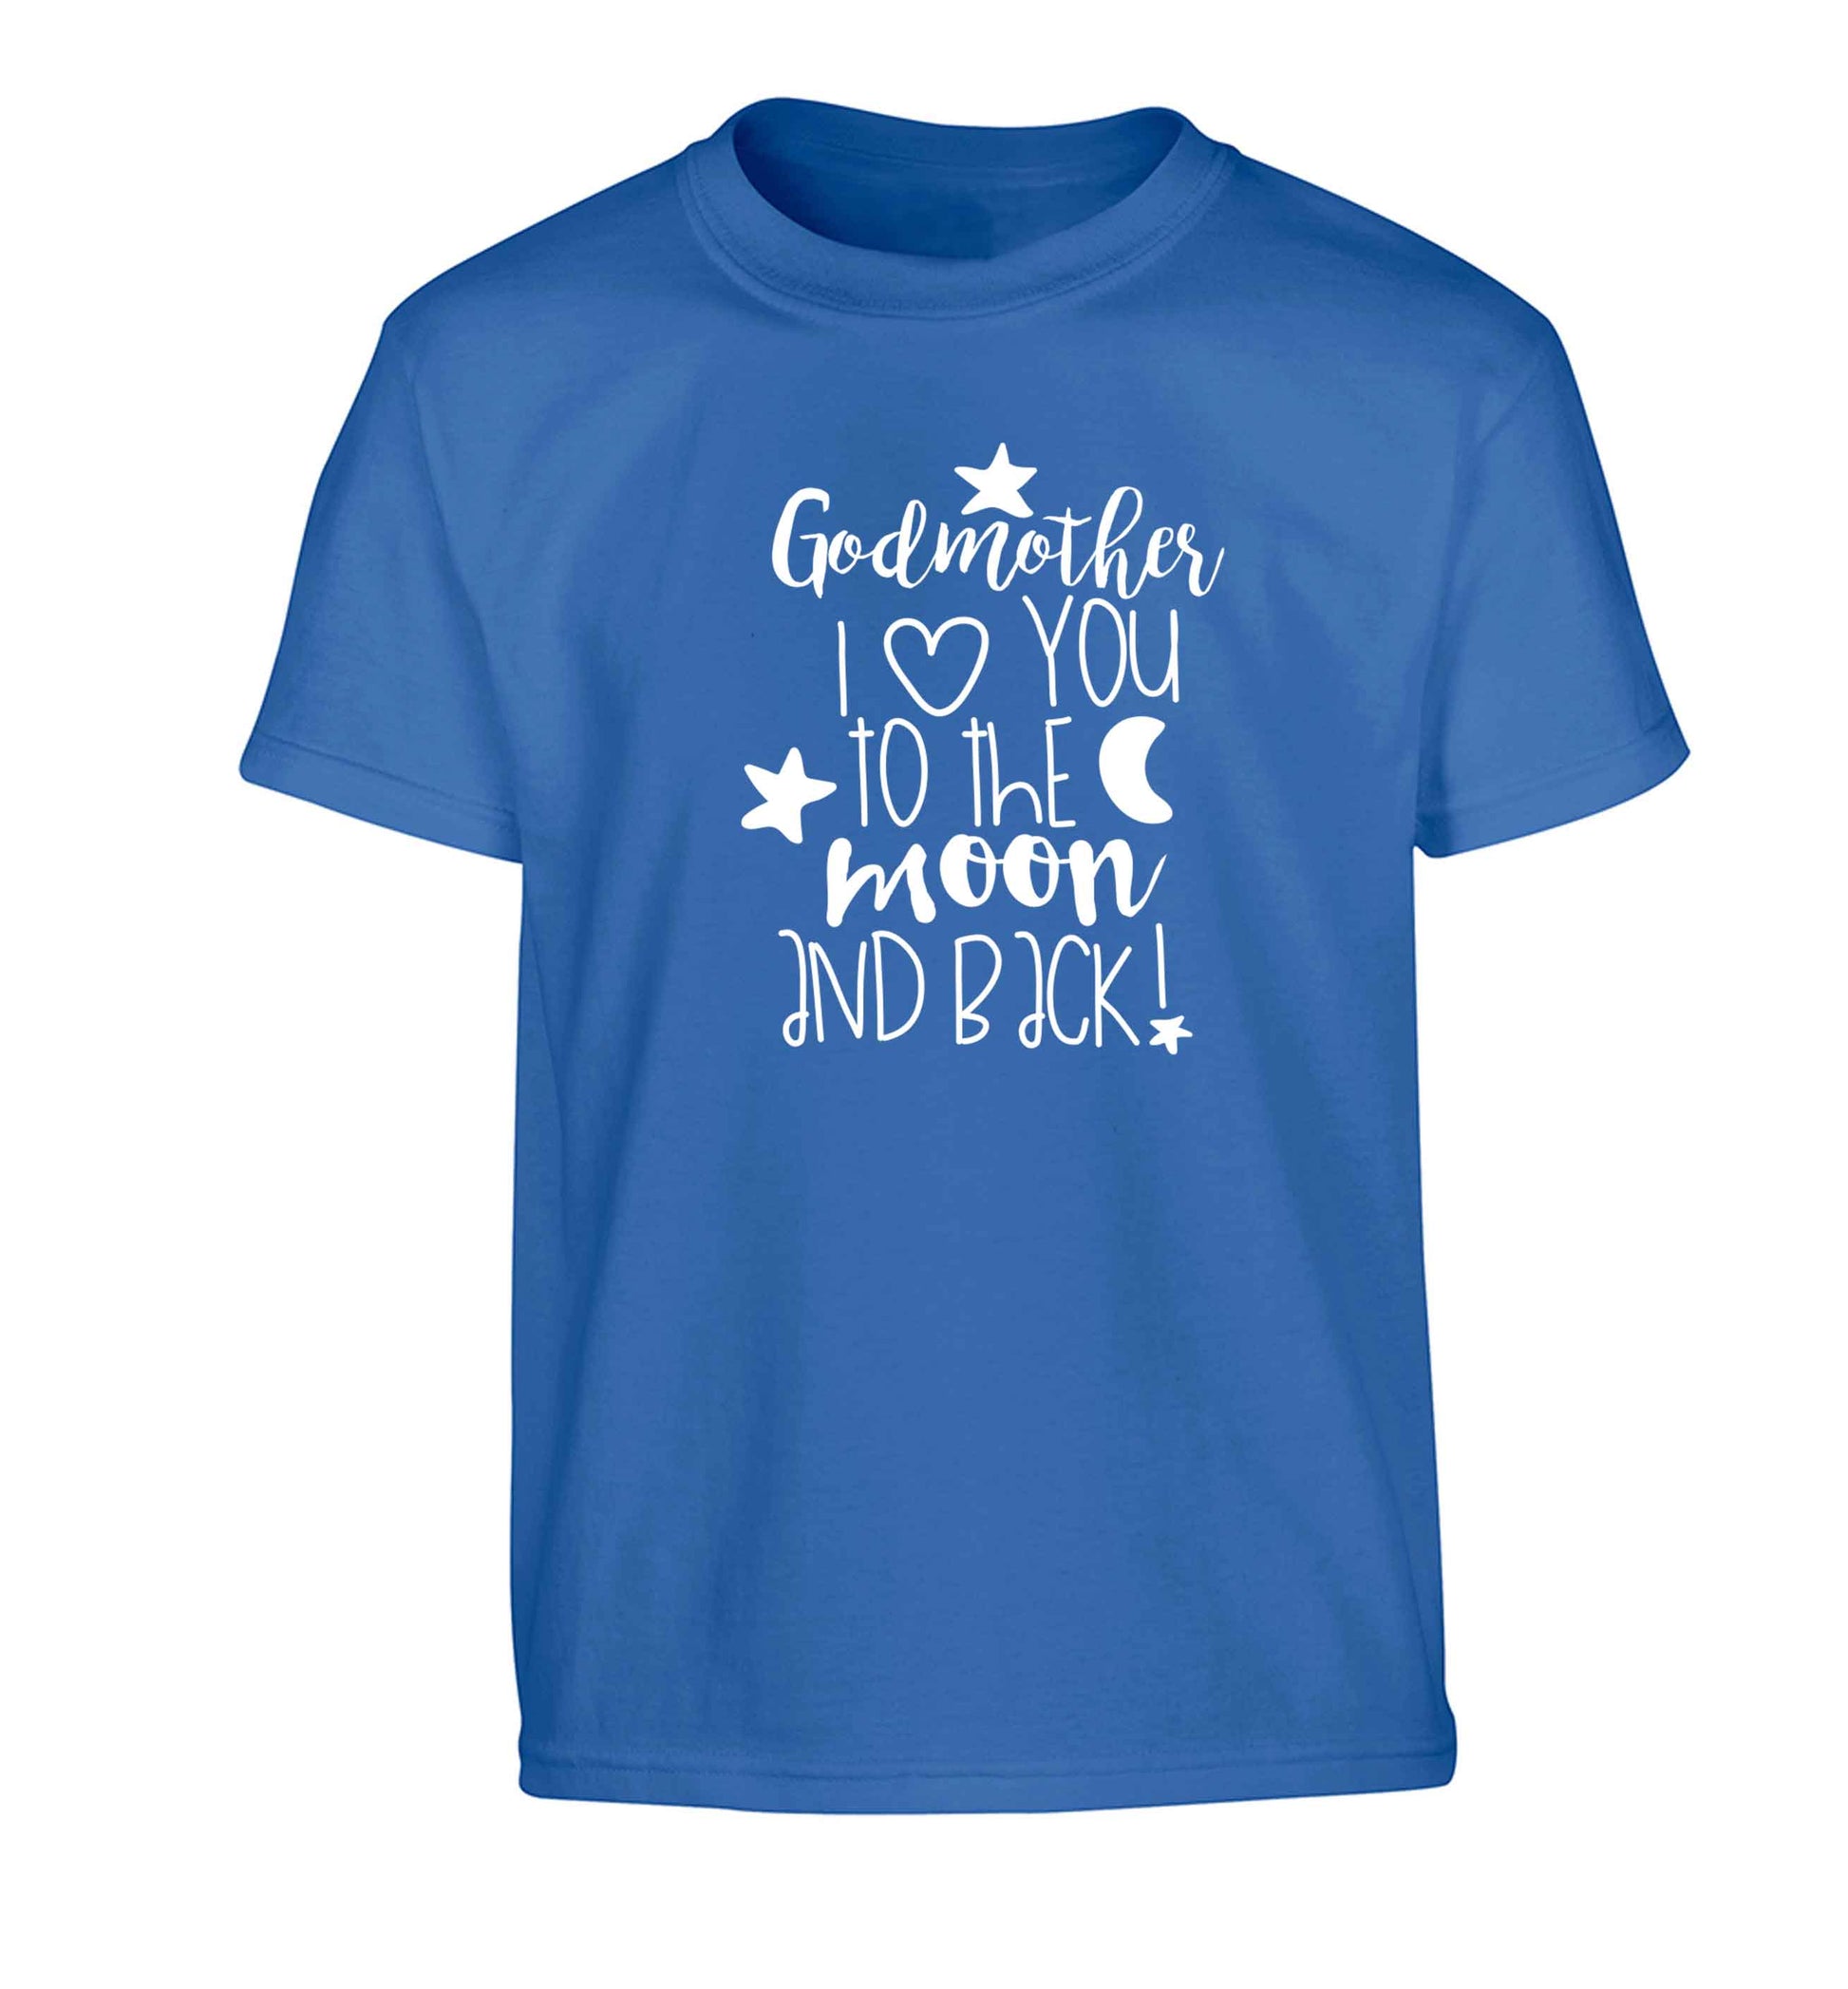 Godmother I love you to the moon and back Children's blue Tshirt 12-13 Years